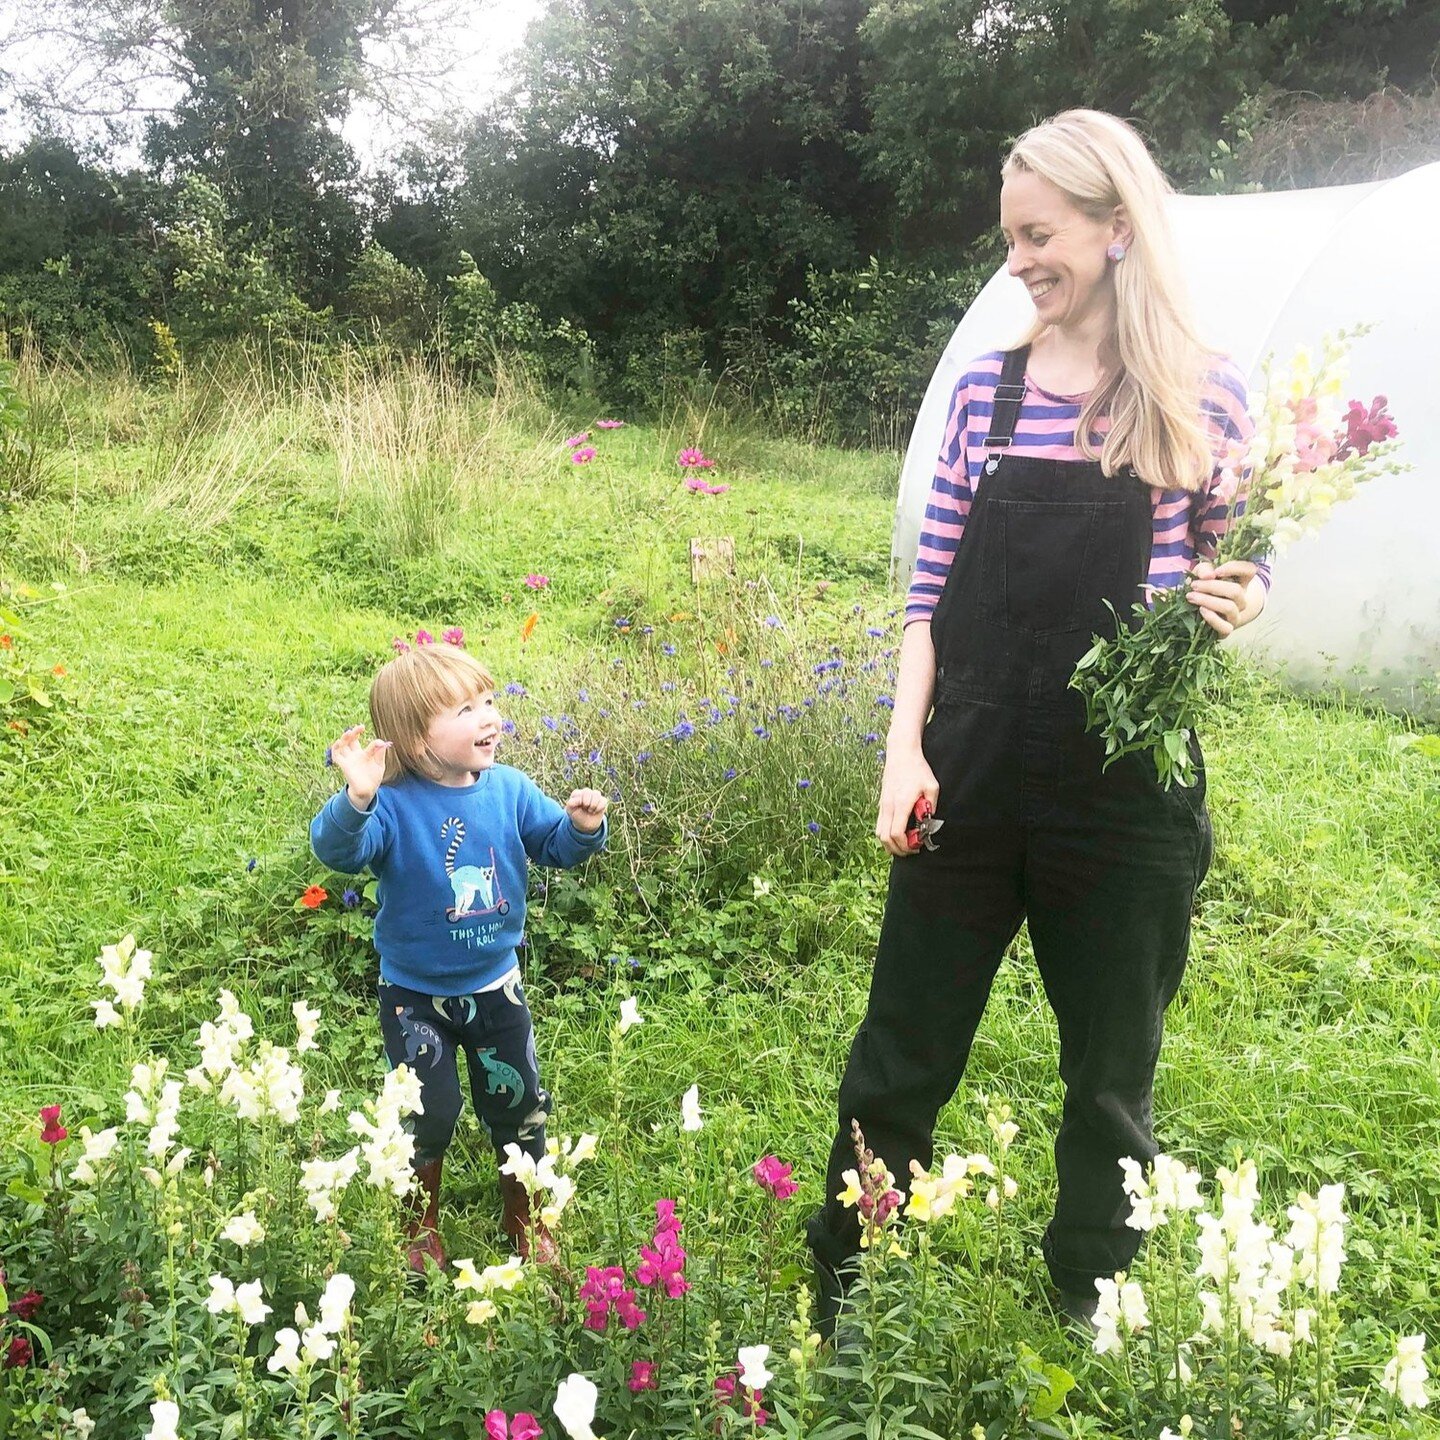 Me and Remy in our pretty wild garden, late summer. I&rsquo;ve been wanting to bridge a connection between products I make in my studio and what I grow in my garden. (The theme of my life this last year has been integration!). So my starting point is